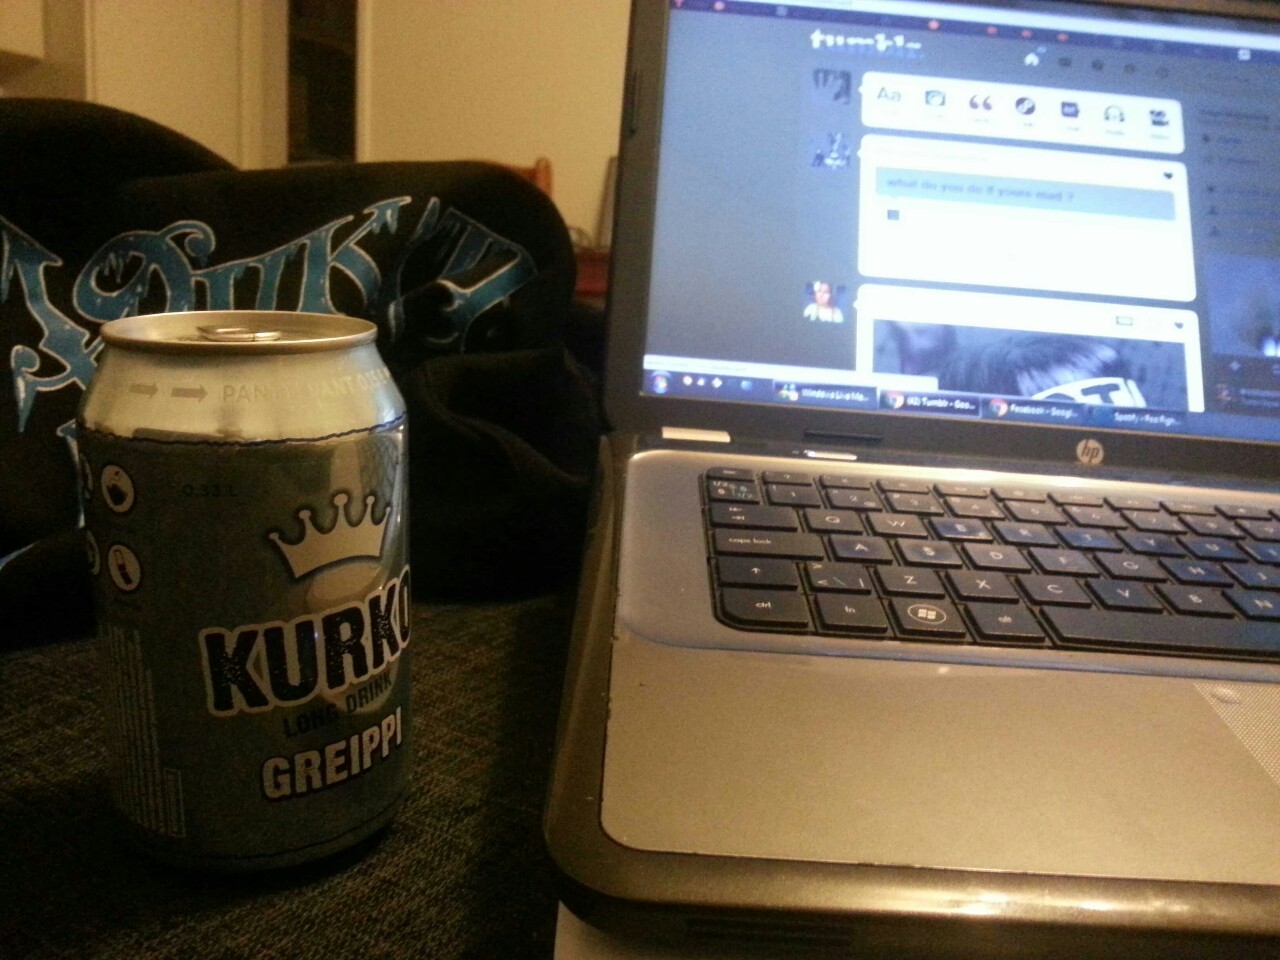 Viikate-hoodie (my outfit for tonight), Kurko grape long drink &amp; my Tumblr-dashboard.